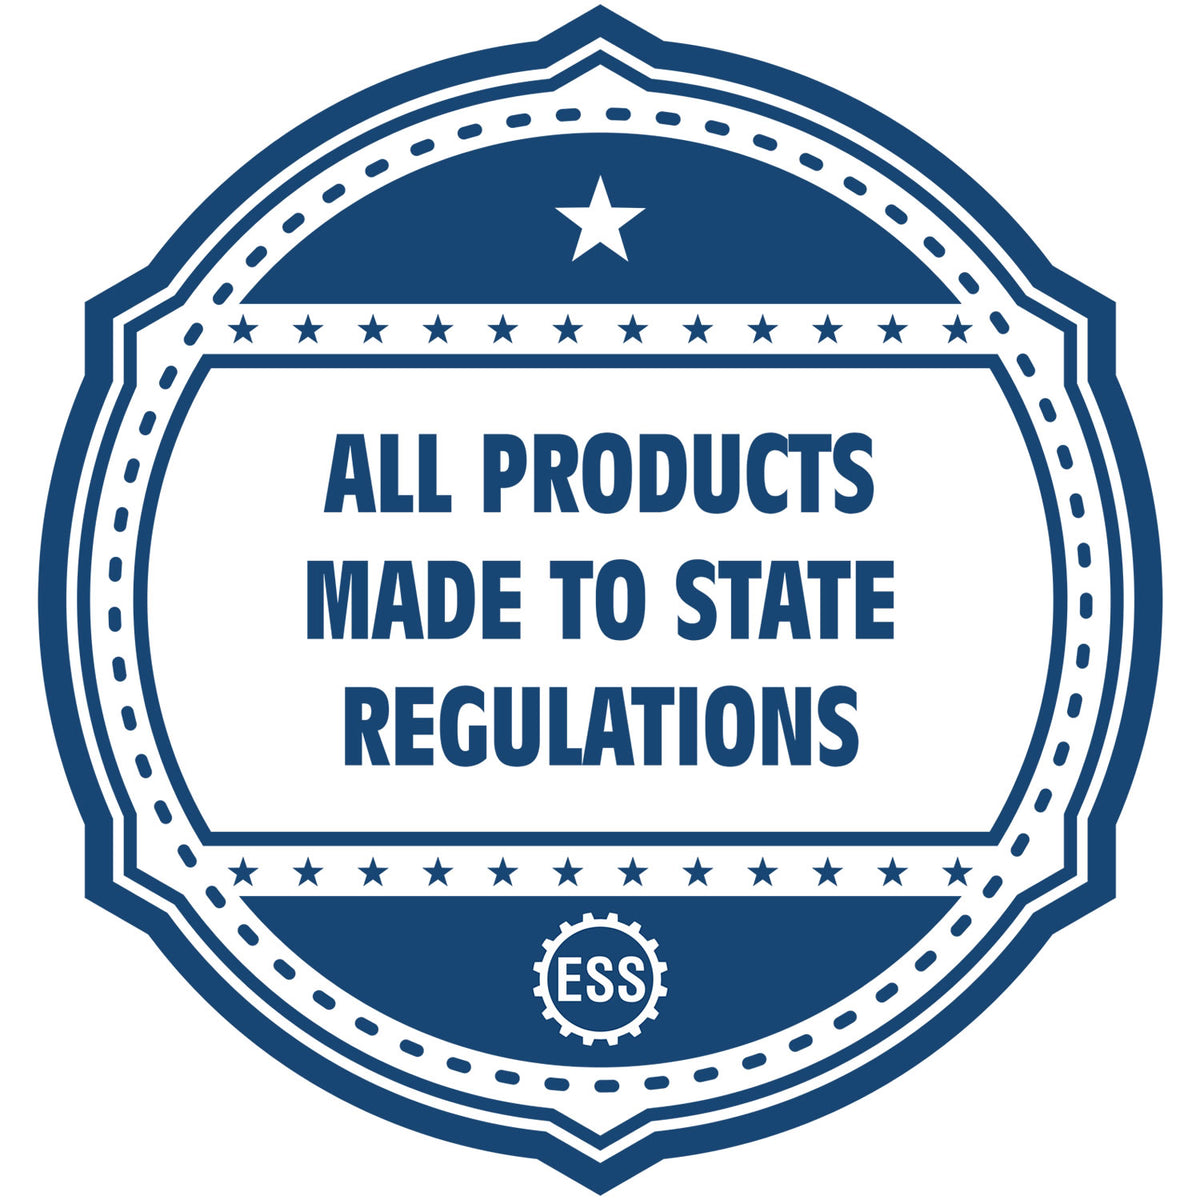 An icon or badge element for the Soft Idaho Professional Engineer Seal showing that this product is made in compliance with state regulations.